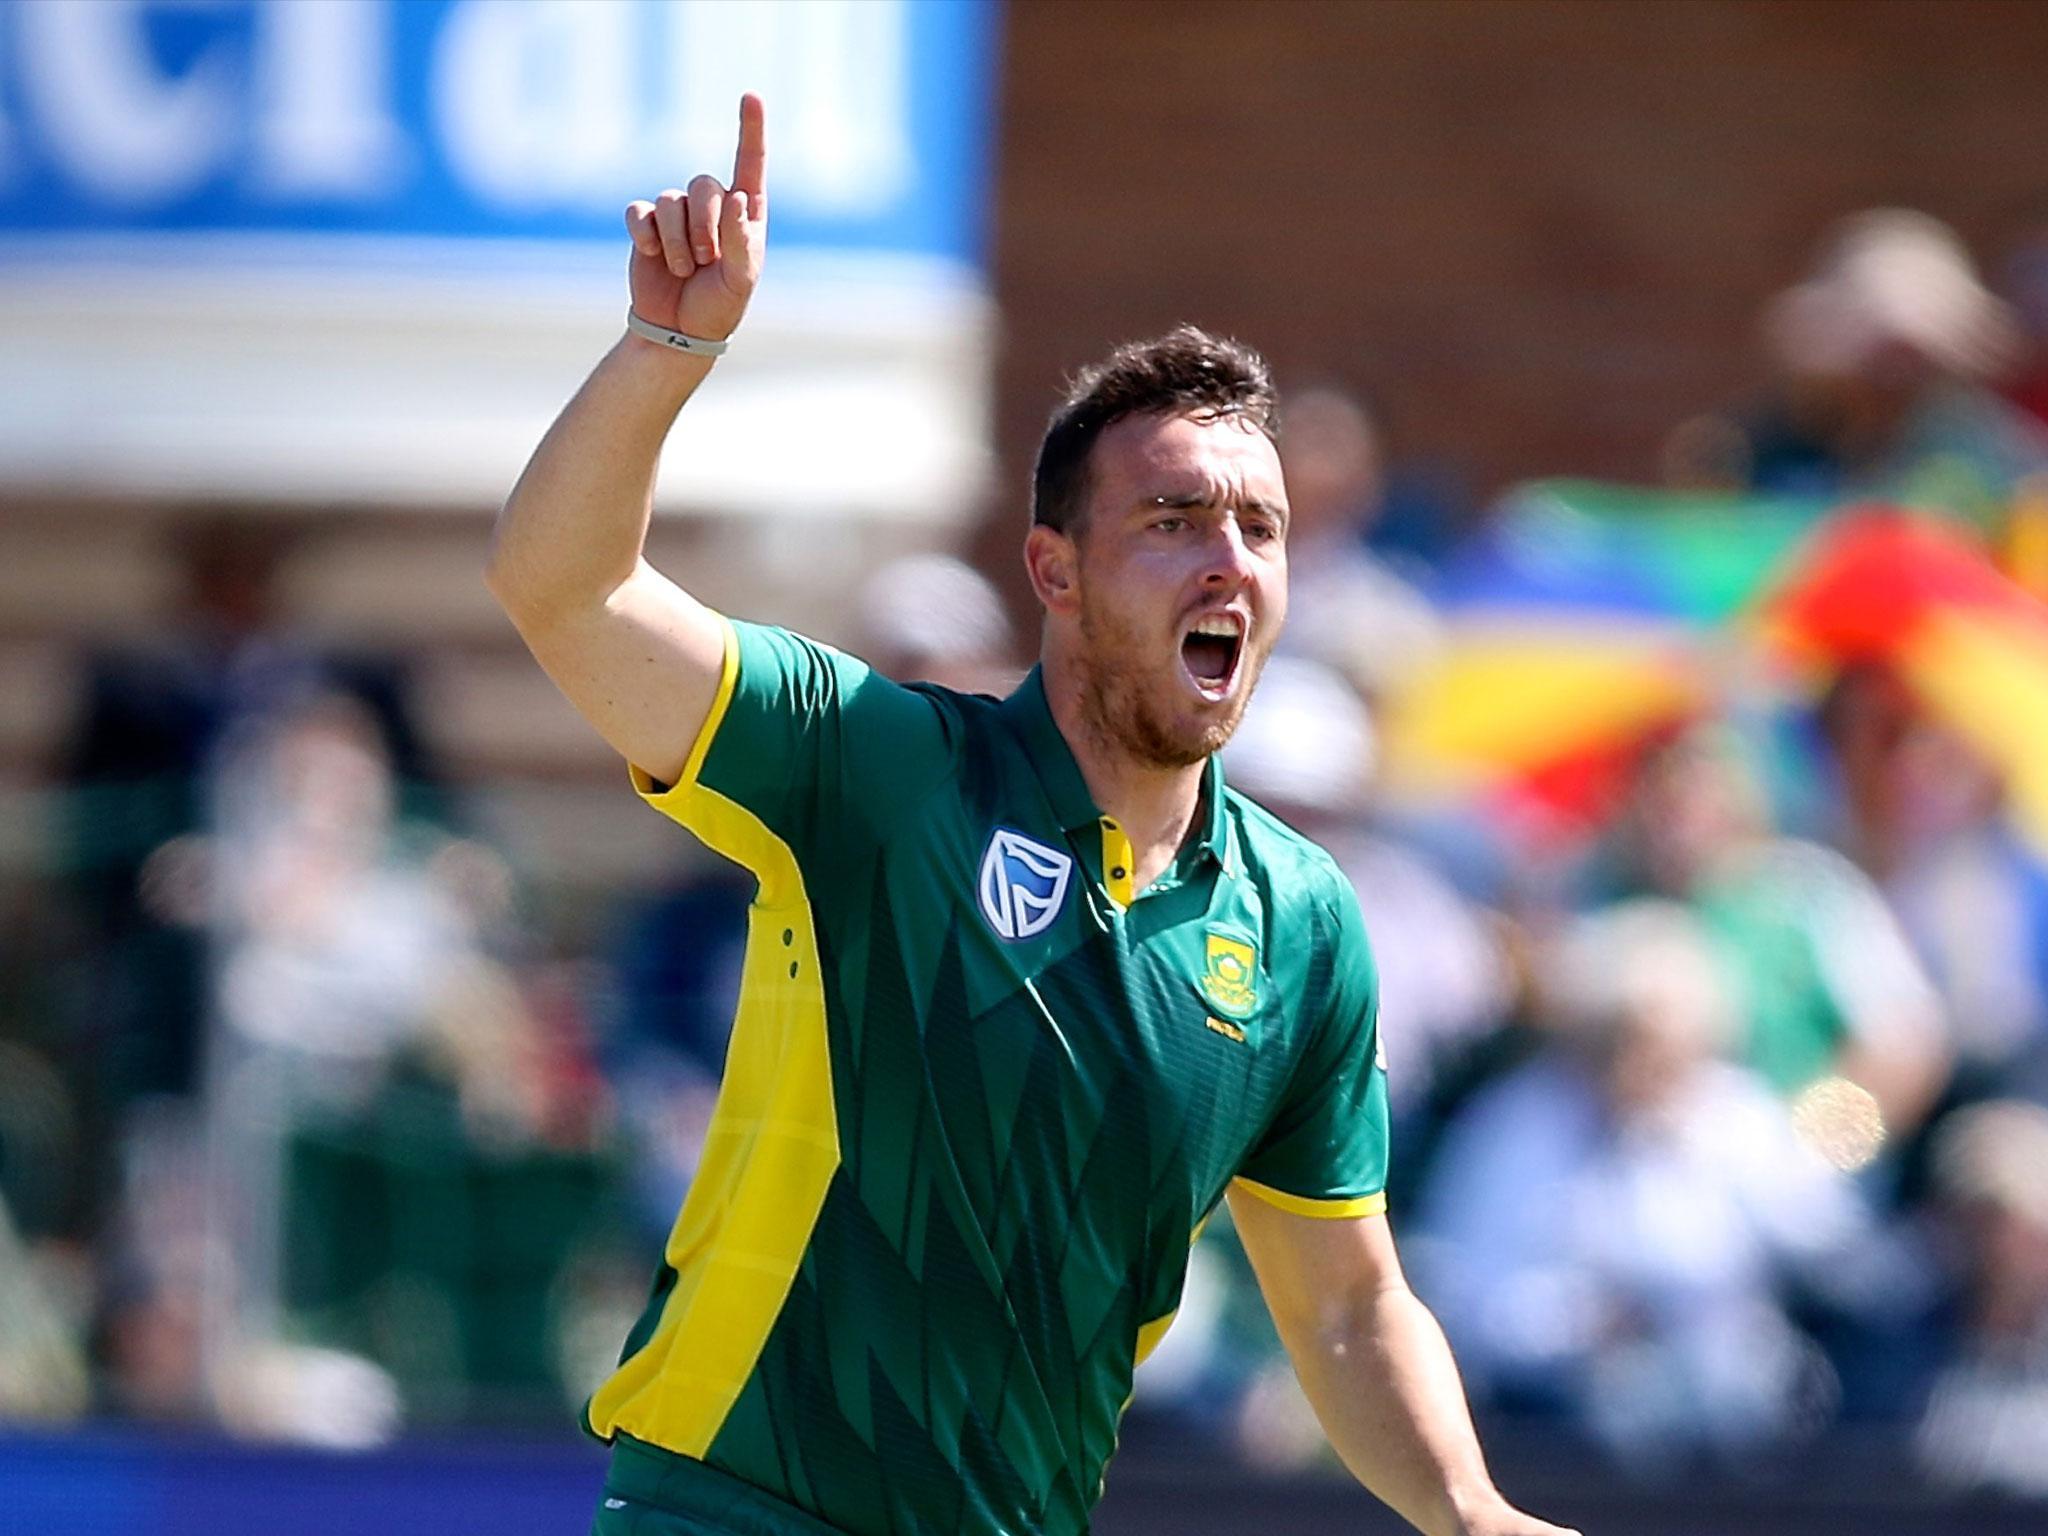 Hampshire’s business in acquiring Kyle Abbott (pictured) and Rilee Rossouw has caused big ripples